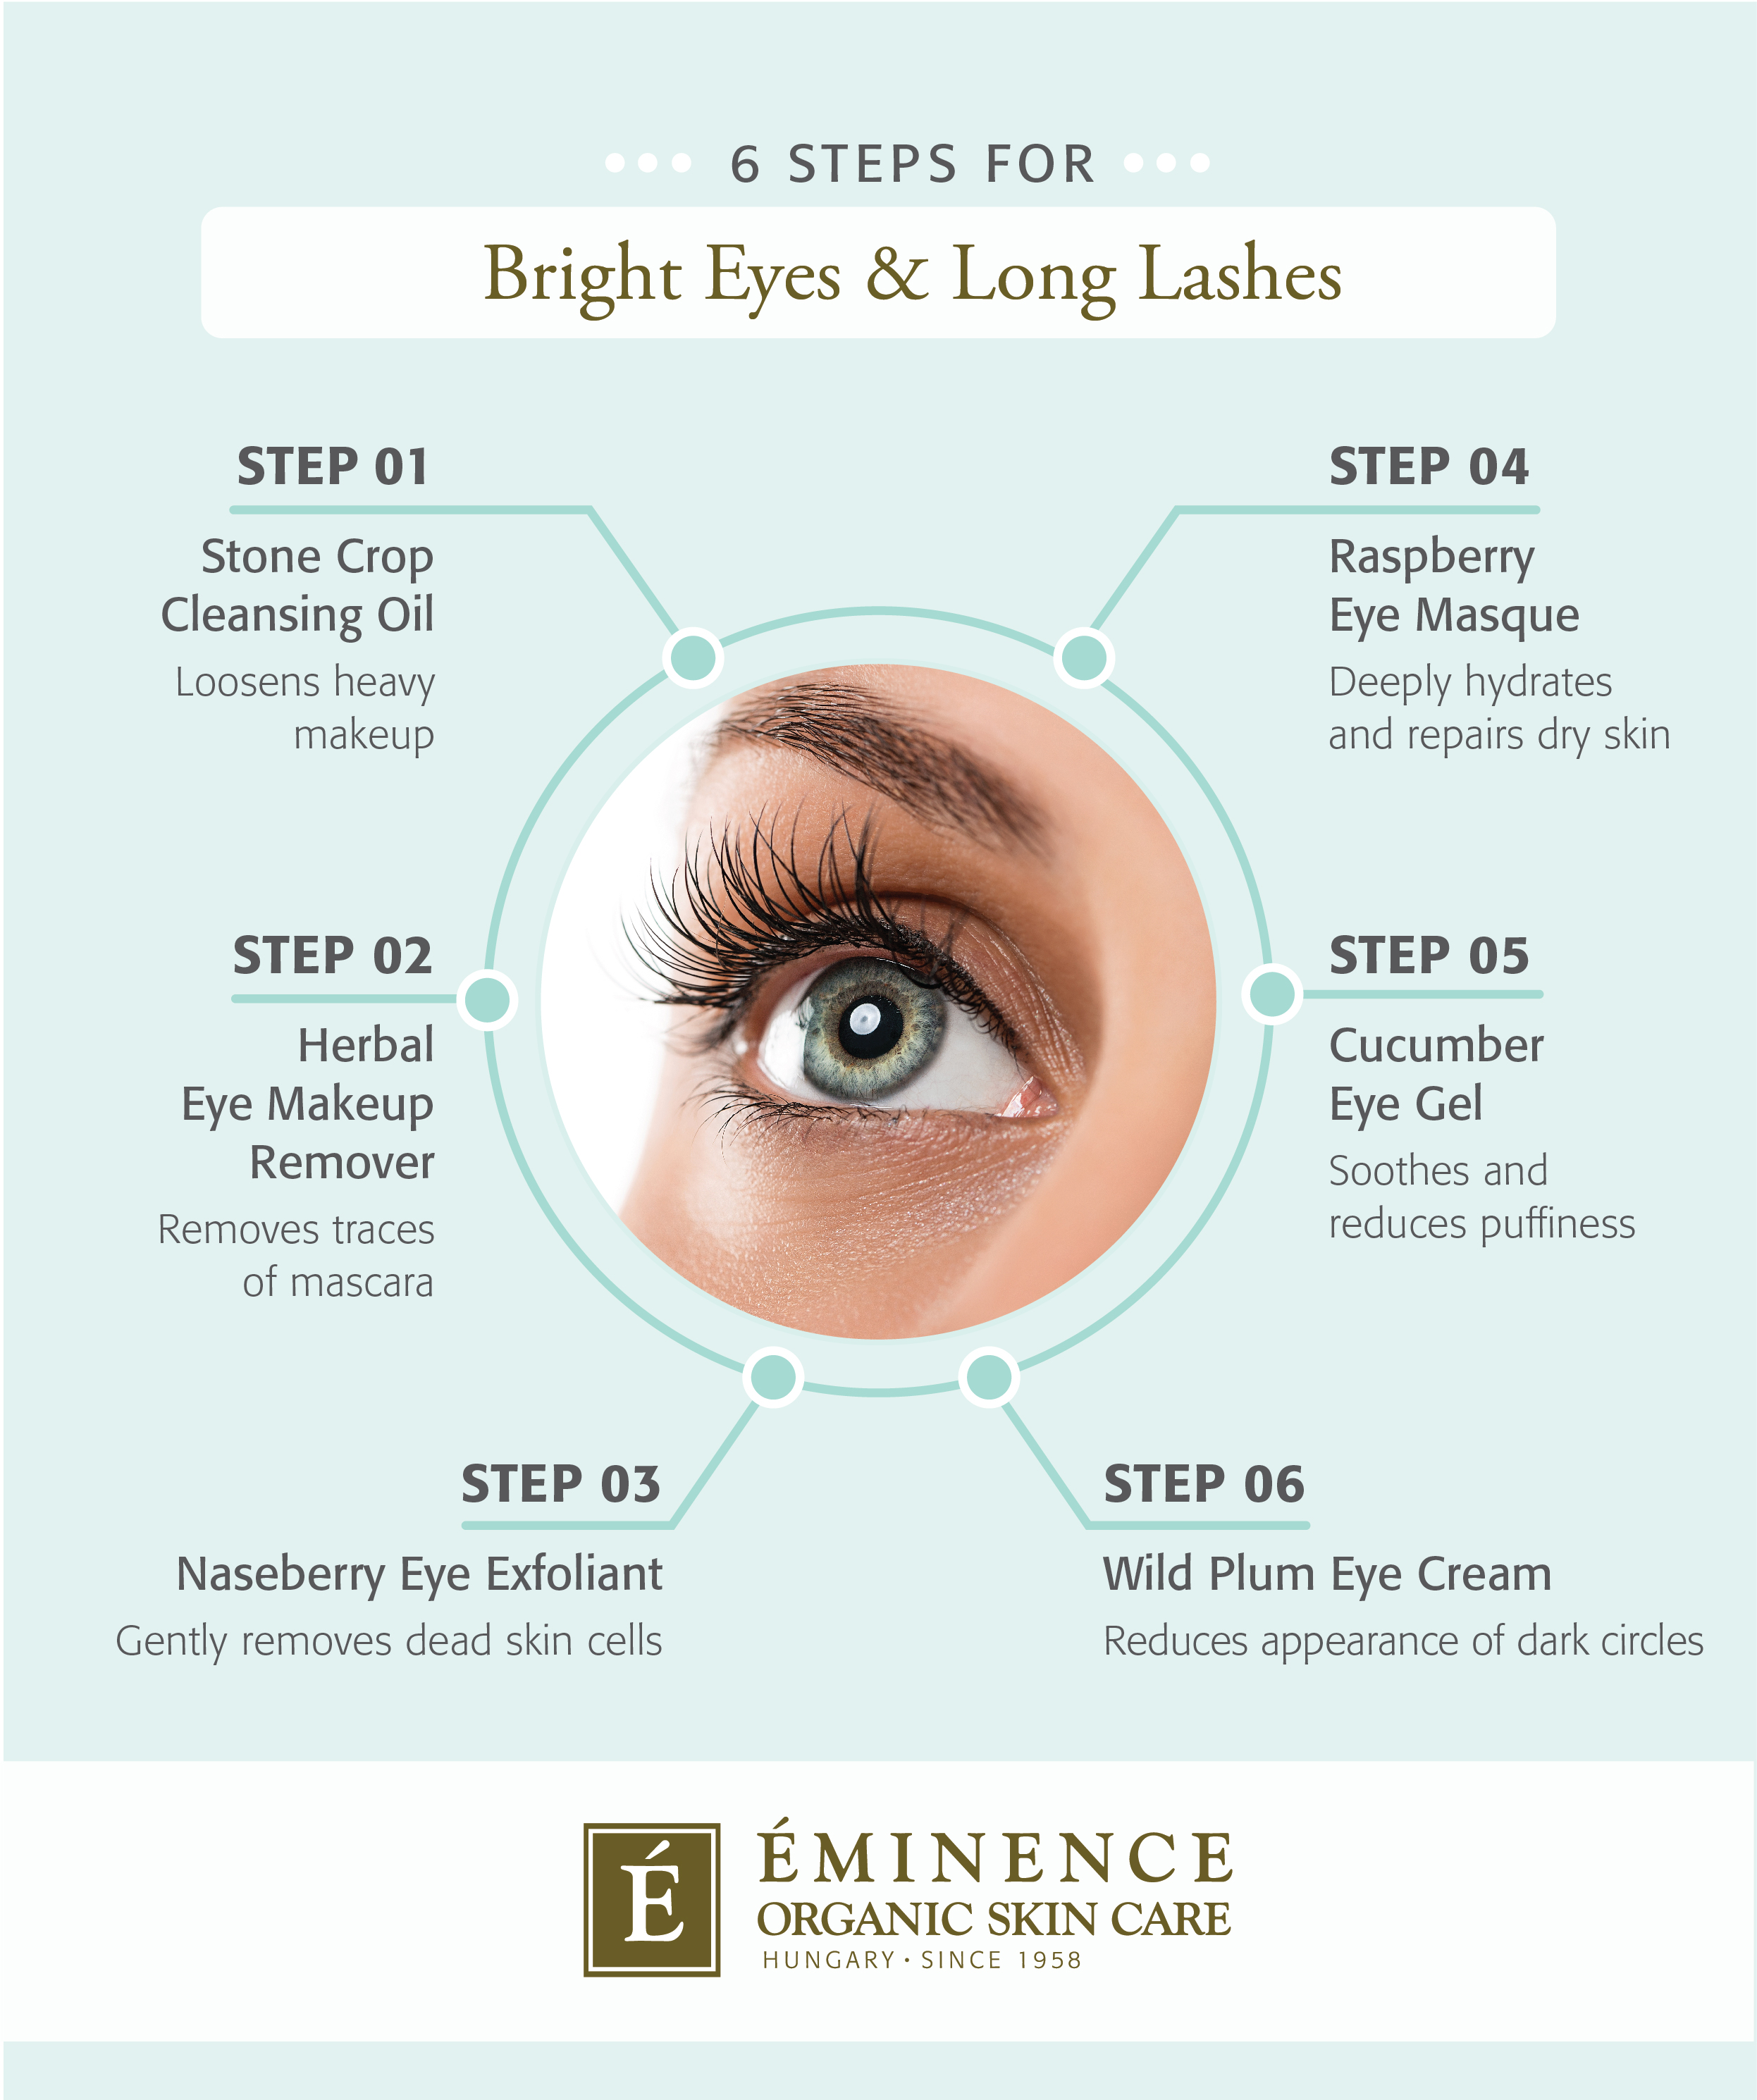 Eminence Organics 6 Steps for Bright Eyes and Long Lashes Infographic